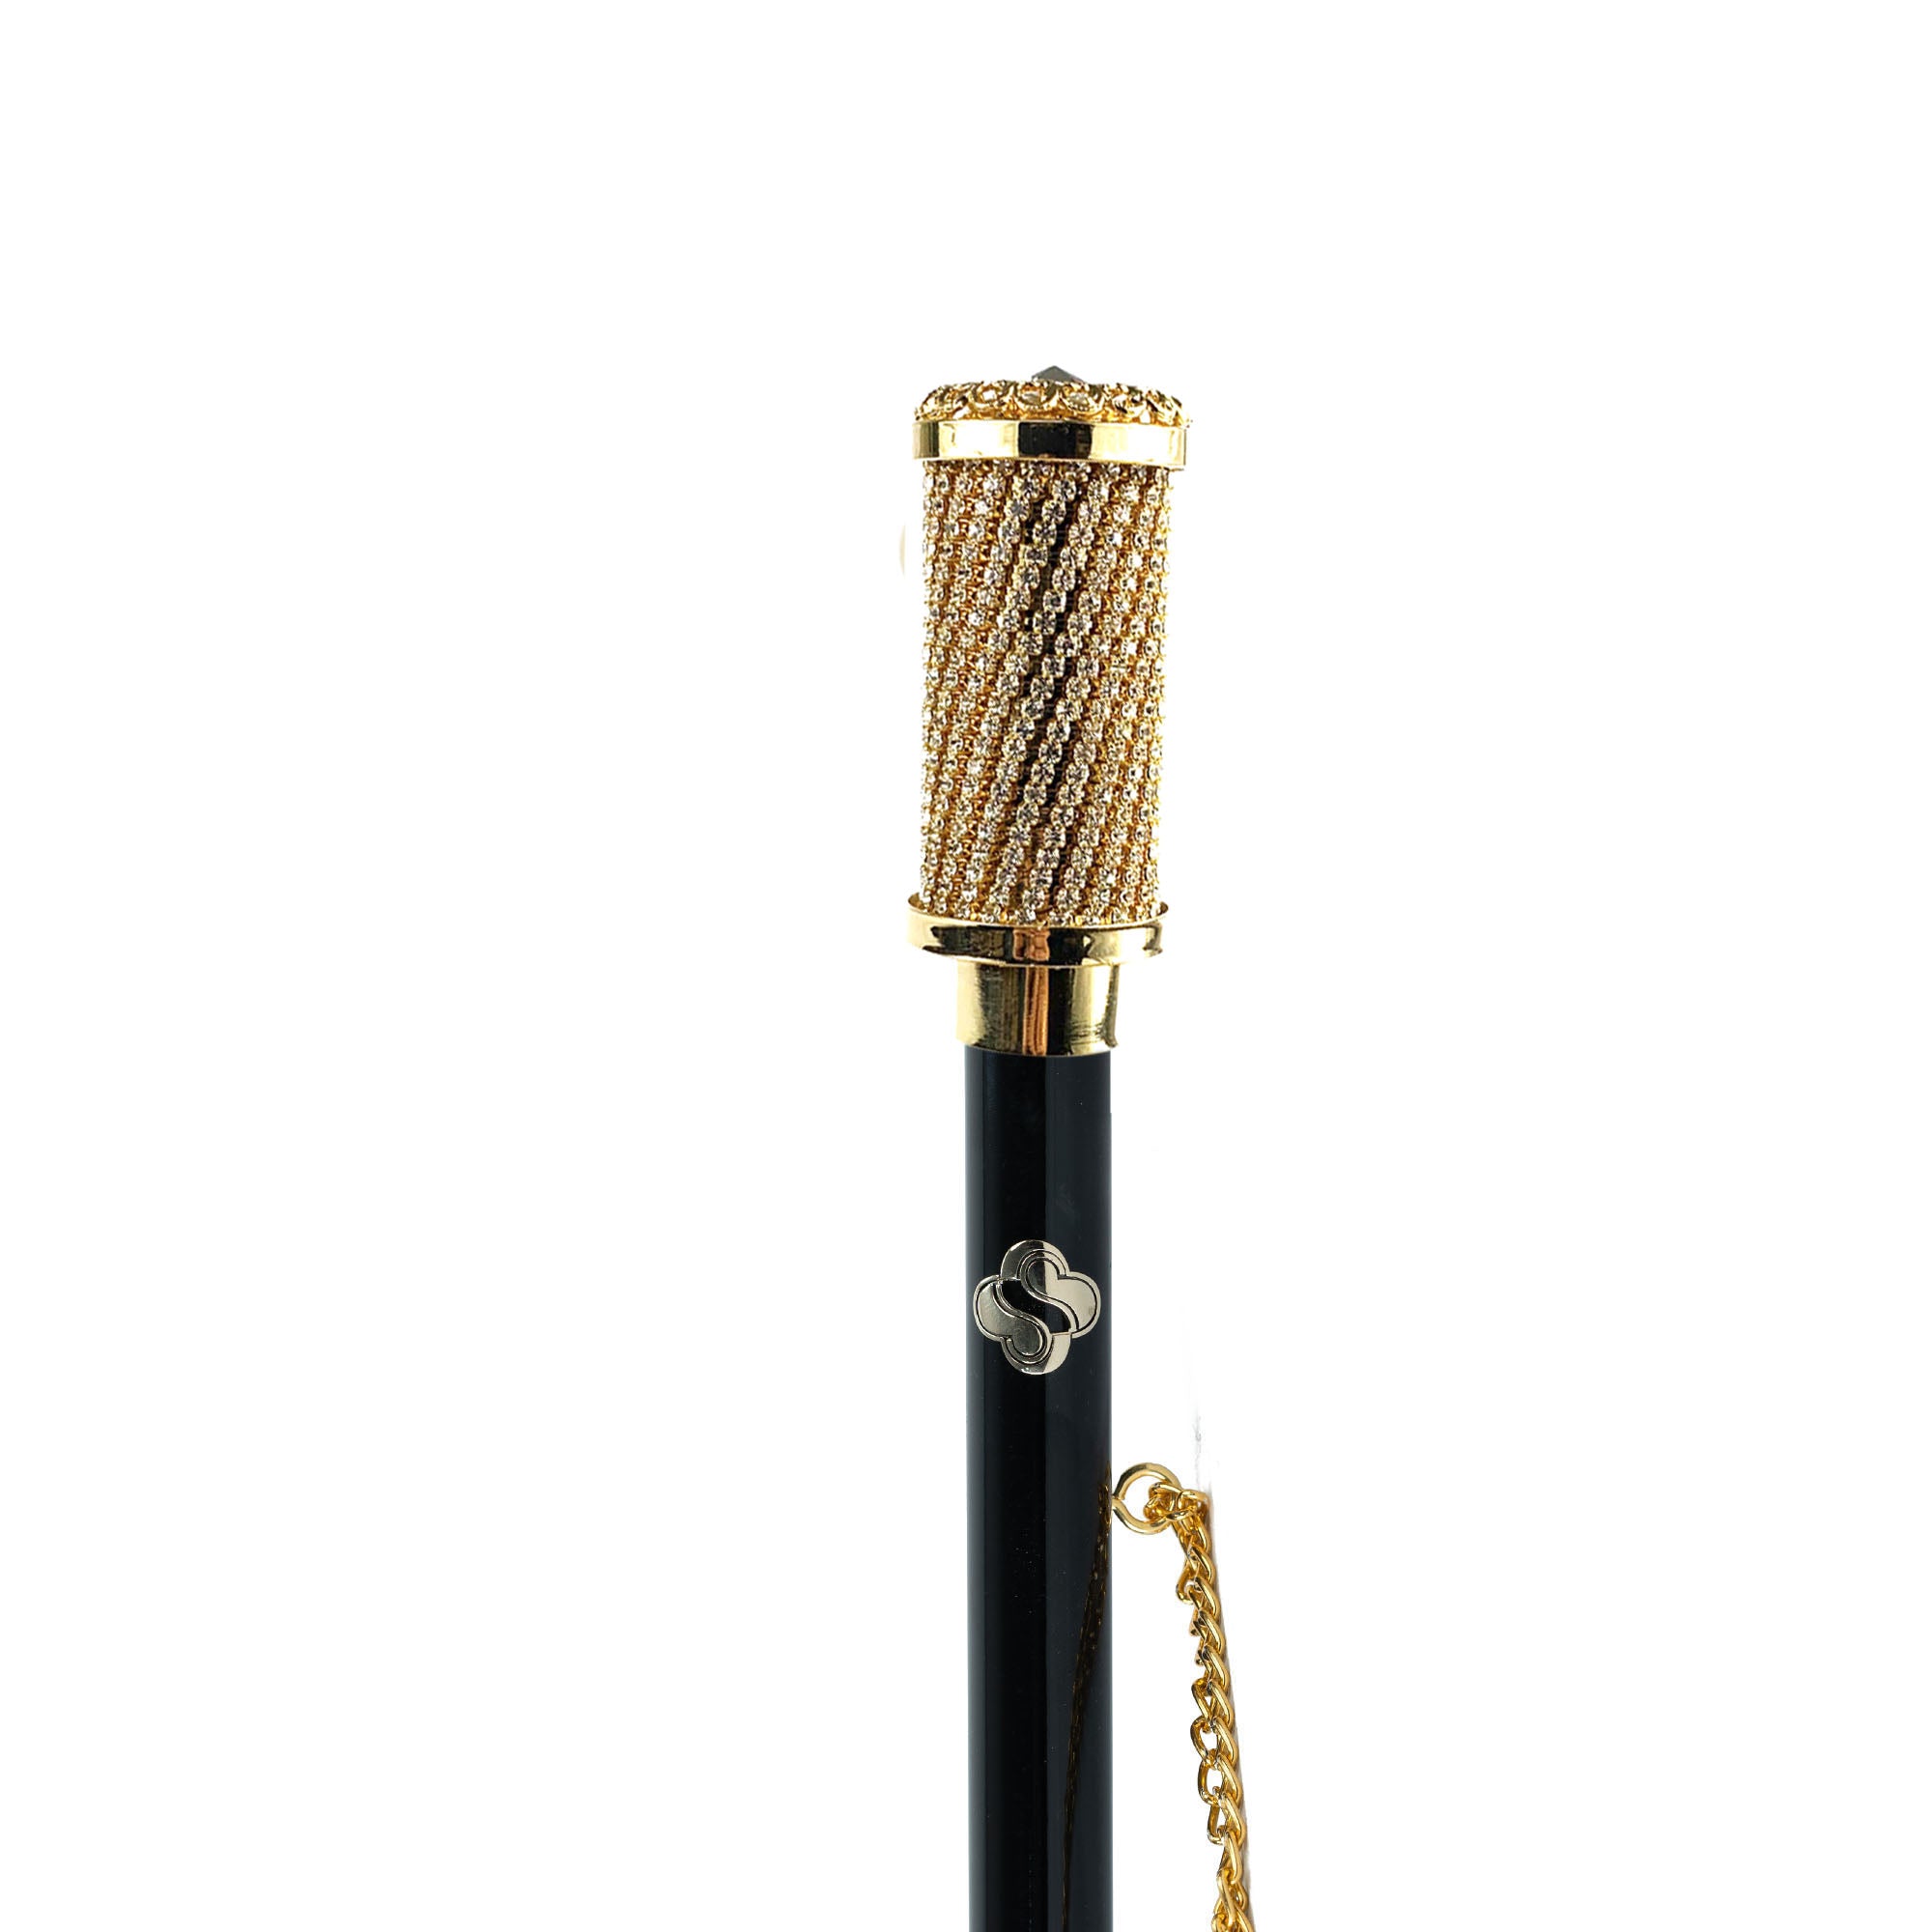 Golden Perfection: 24K Gold-Plated Shoehorn with Crystals